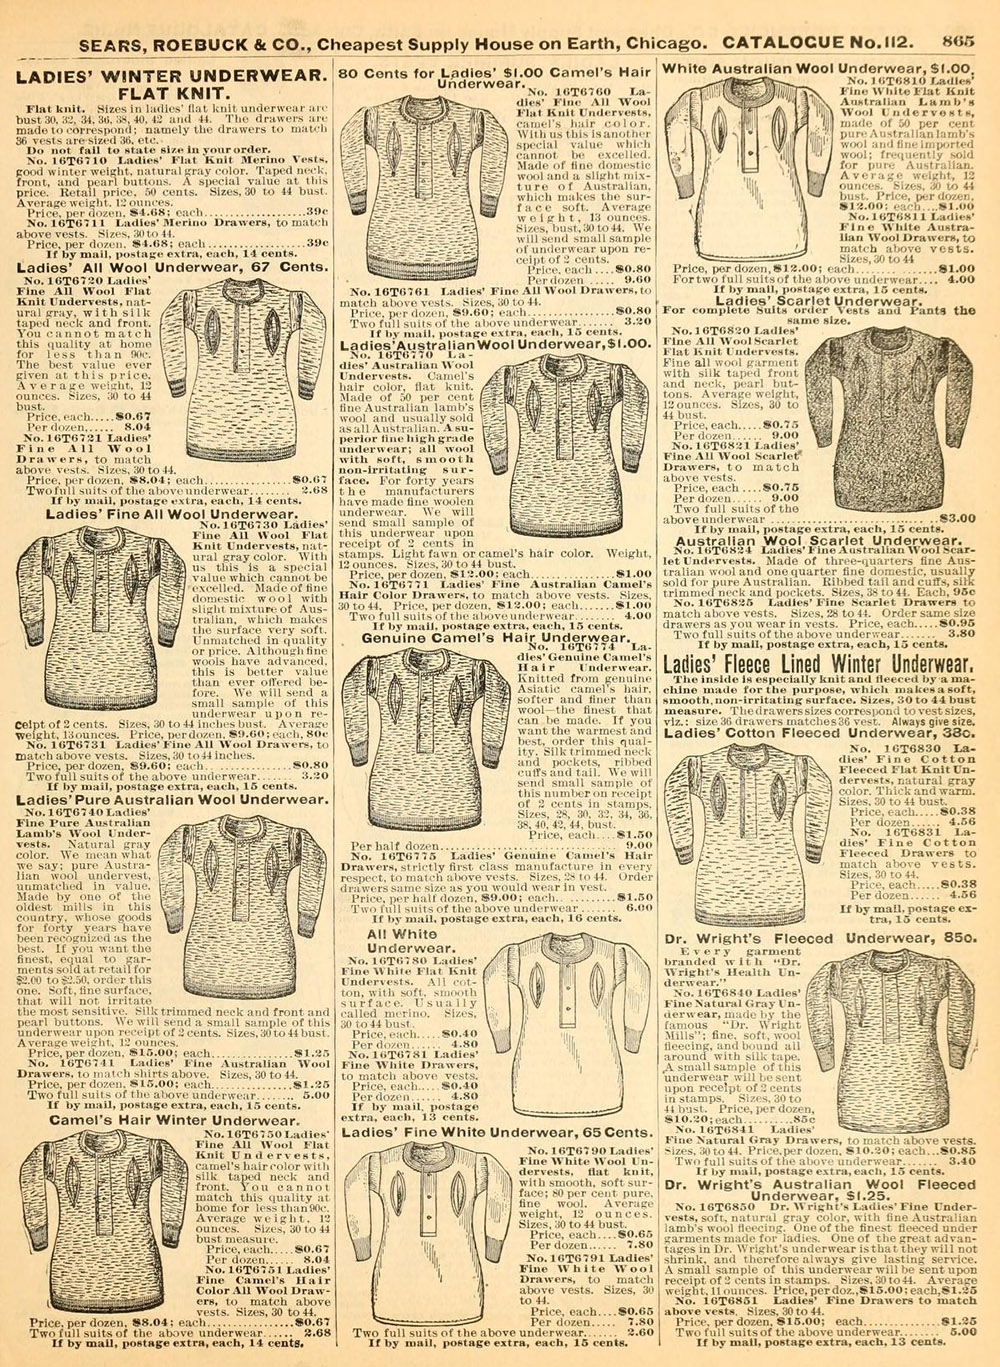 ladies long johns page of early 1900s sears catalog